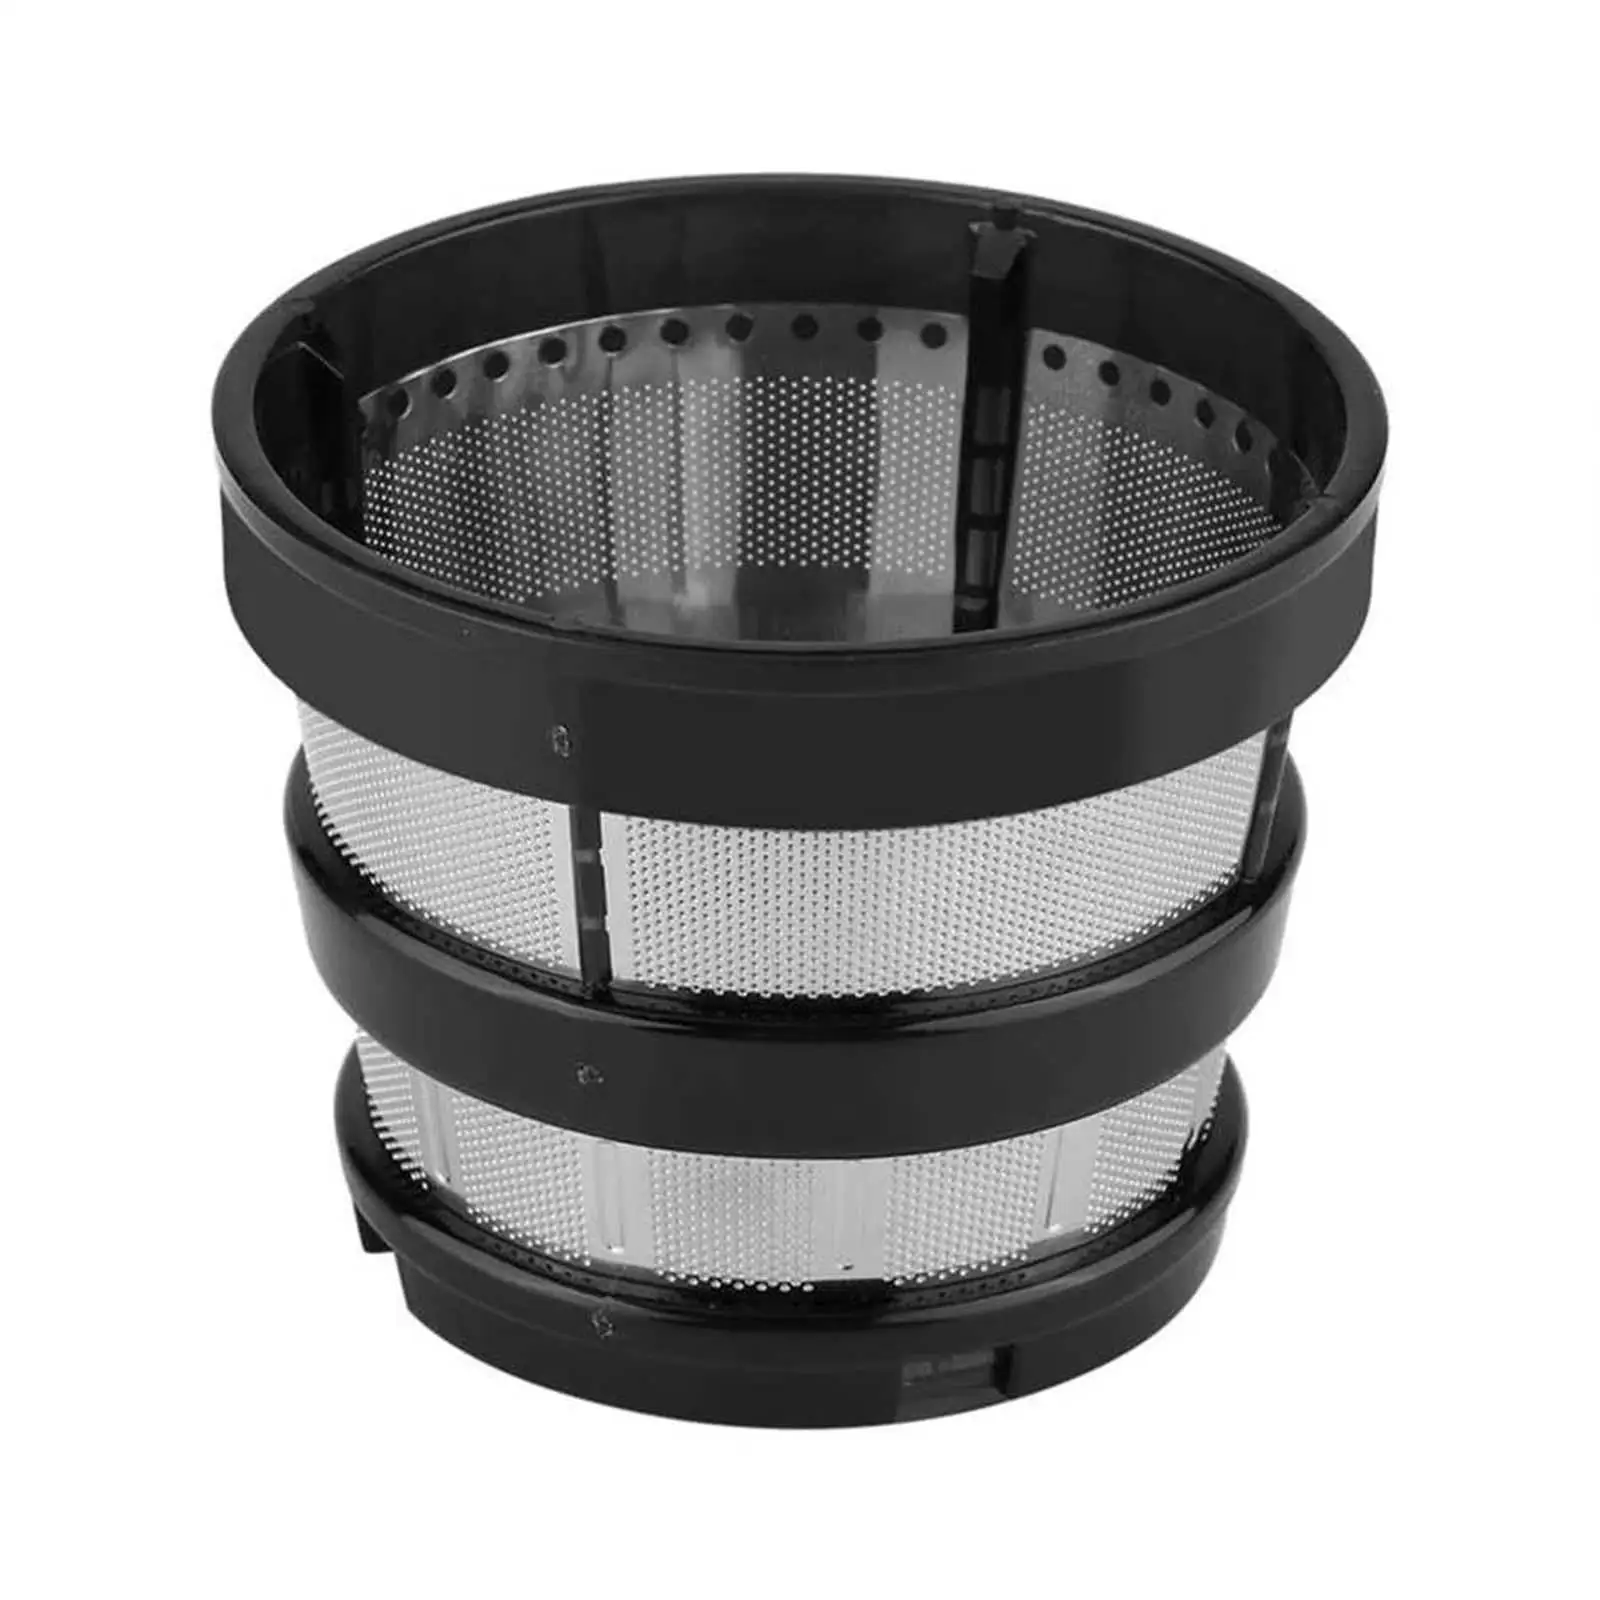 Juicer Fine Mesh Screen Strainer Filter Equipment Tool Accessories Parts Stainless Steel Filters Basket for Stain Sponge